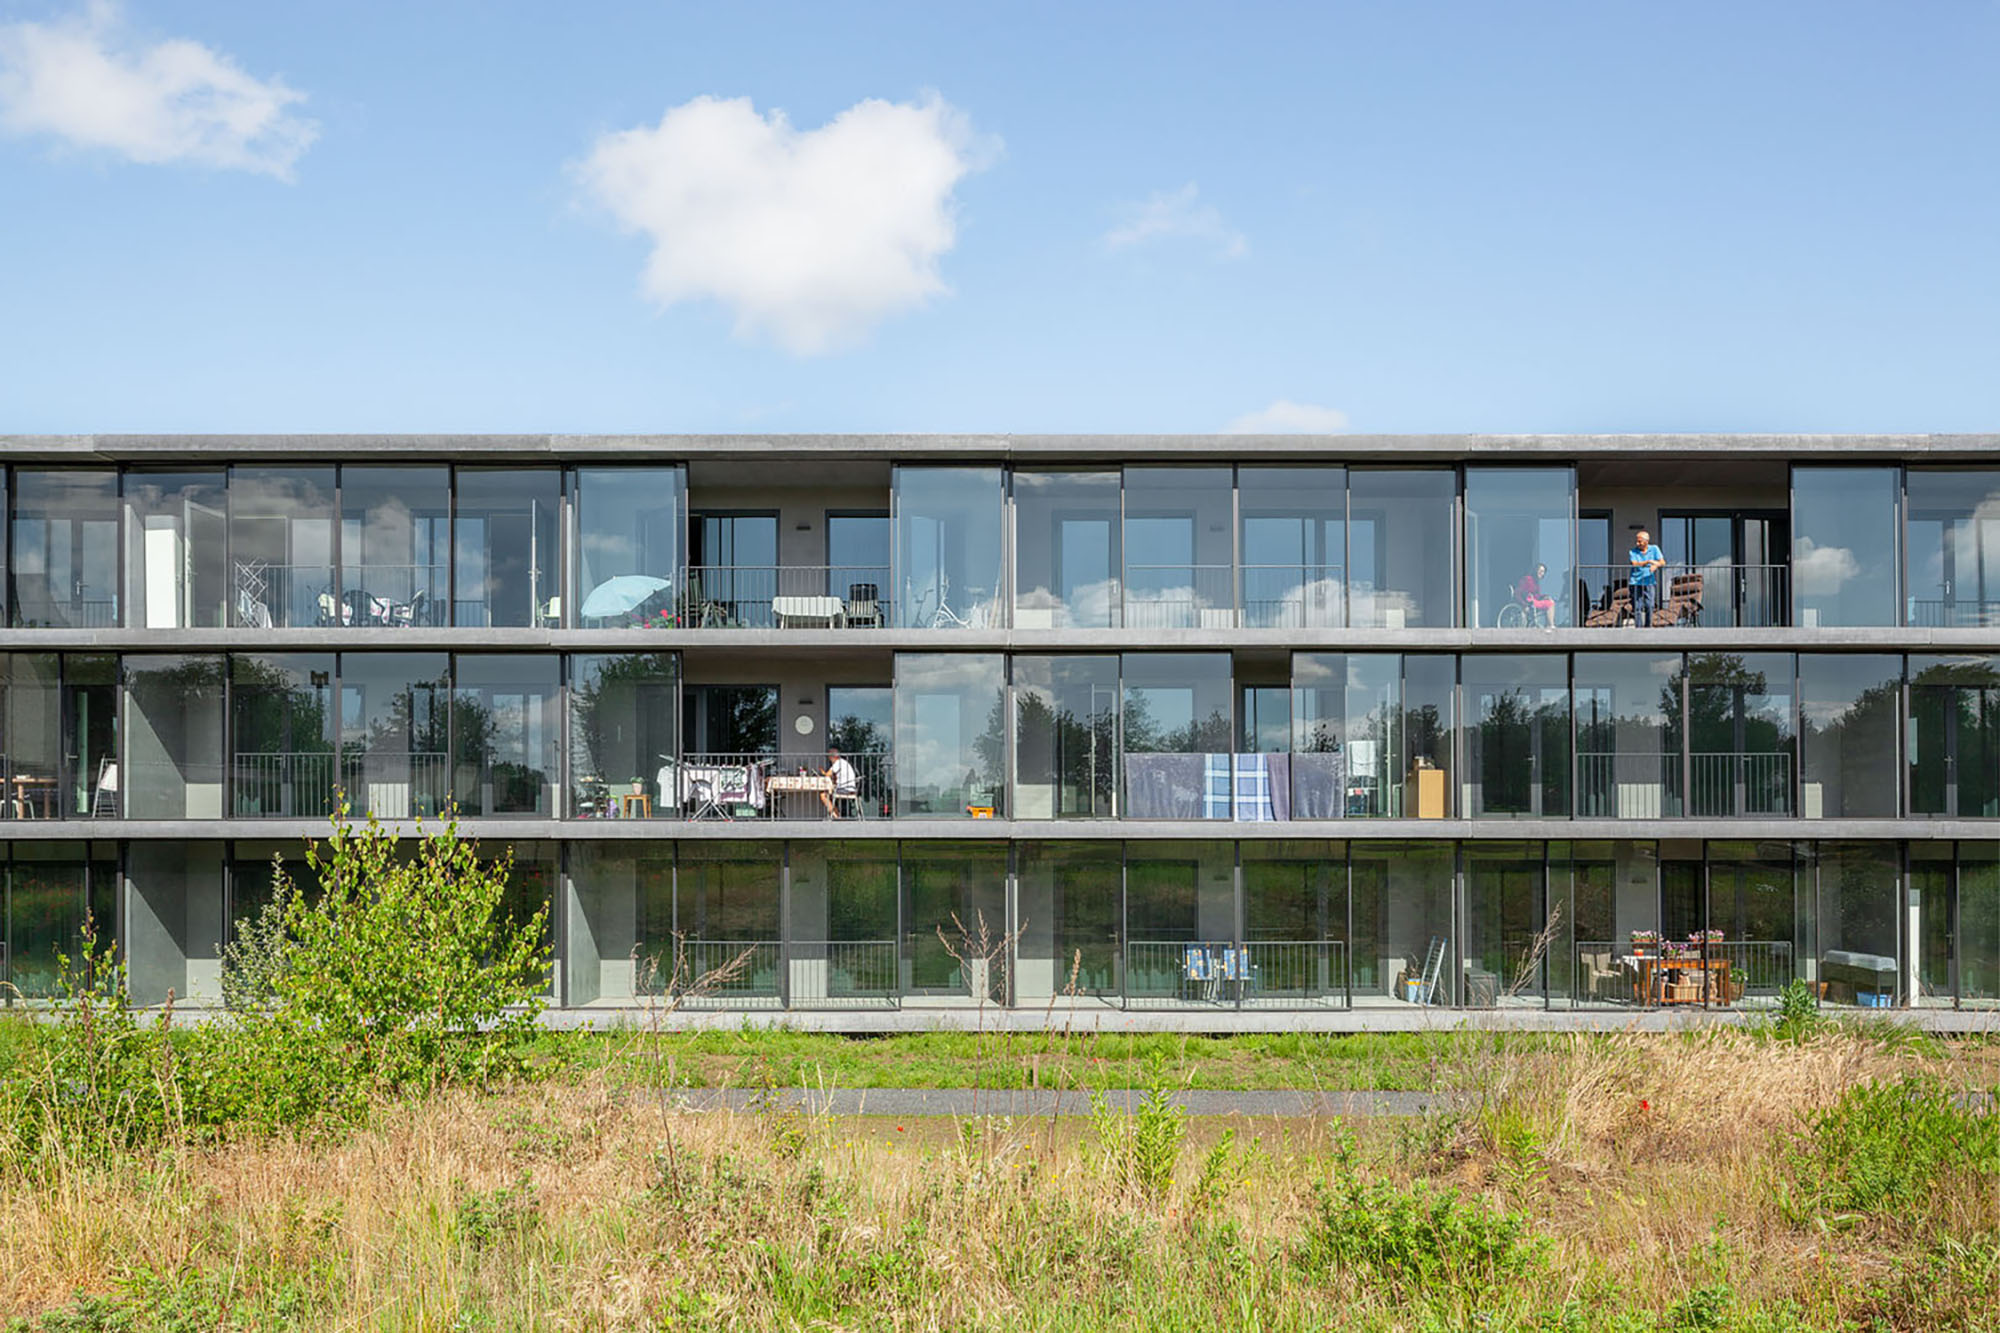 Ten Kerselaere Residential Care Center design by Atelier Kempe Thill